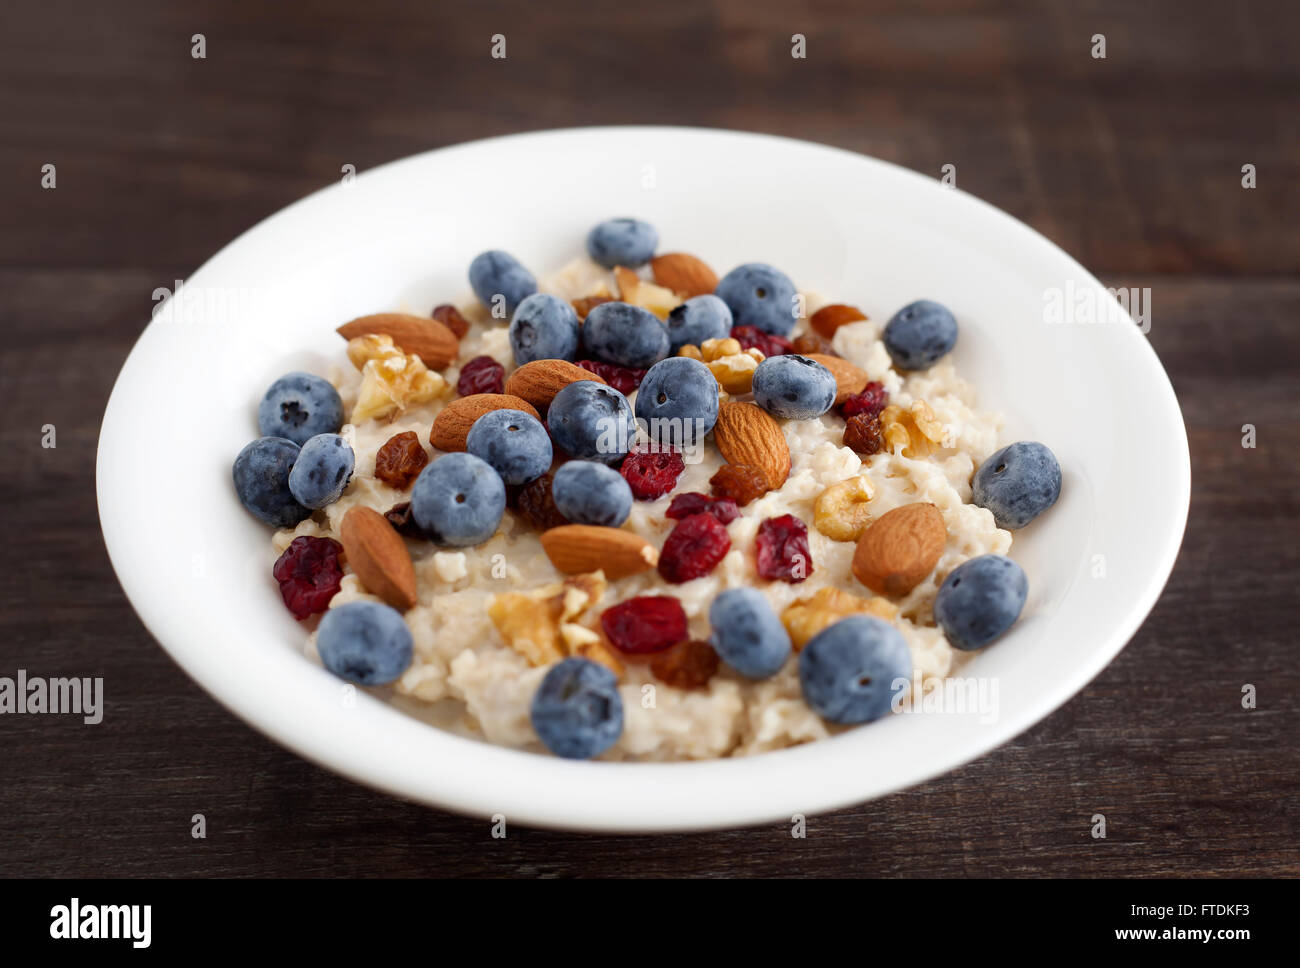 Porridge breakfast with blueberry, dried cranberries, almonds and walnuts. Stock Photo